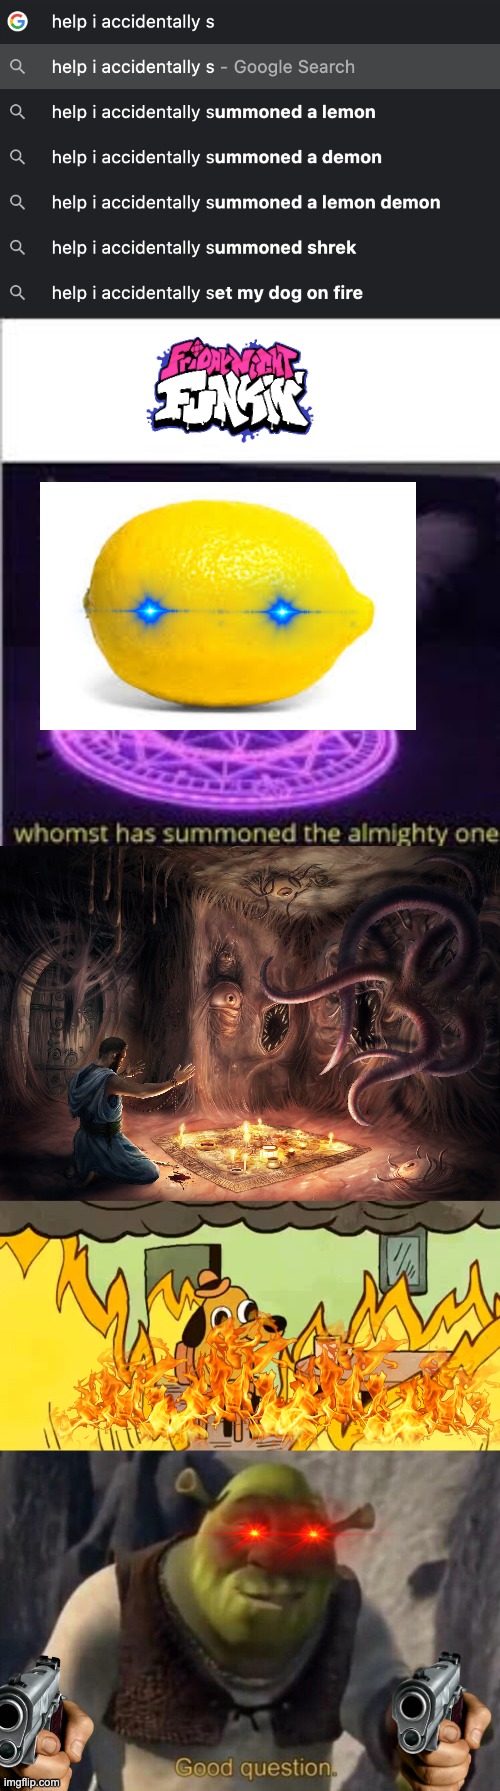 Im tired | image tagged in whomst has summoned the almighty one,dog on fire,shrek good question,look at this dude | made w/ Imgflip meme maker